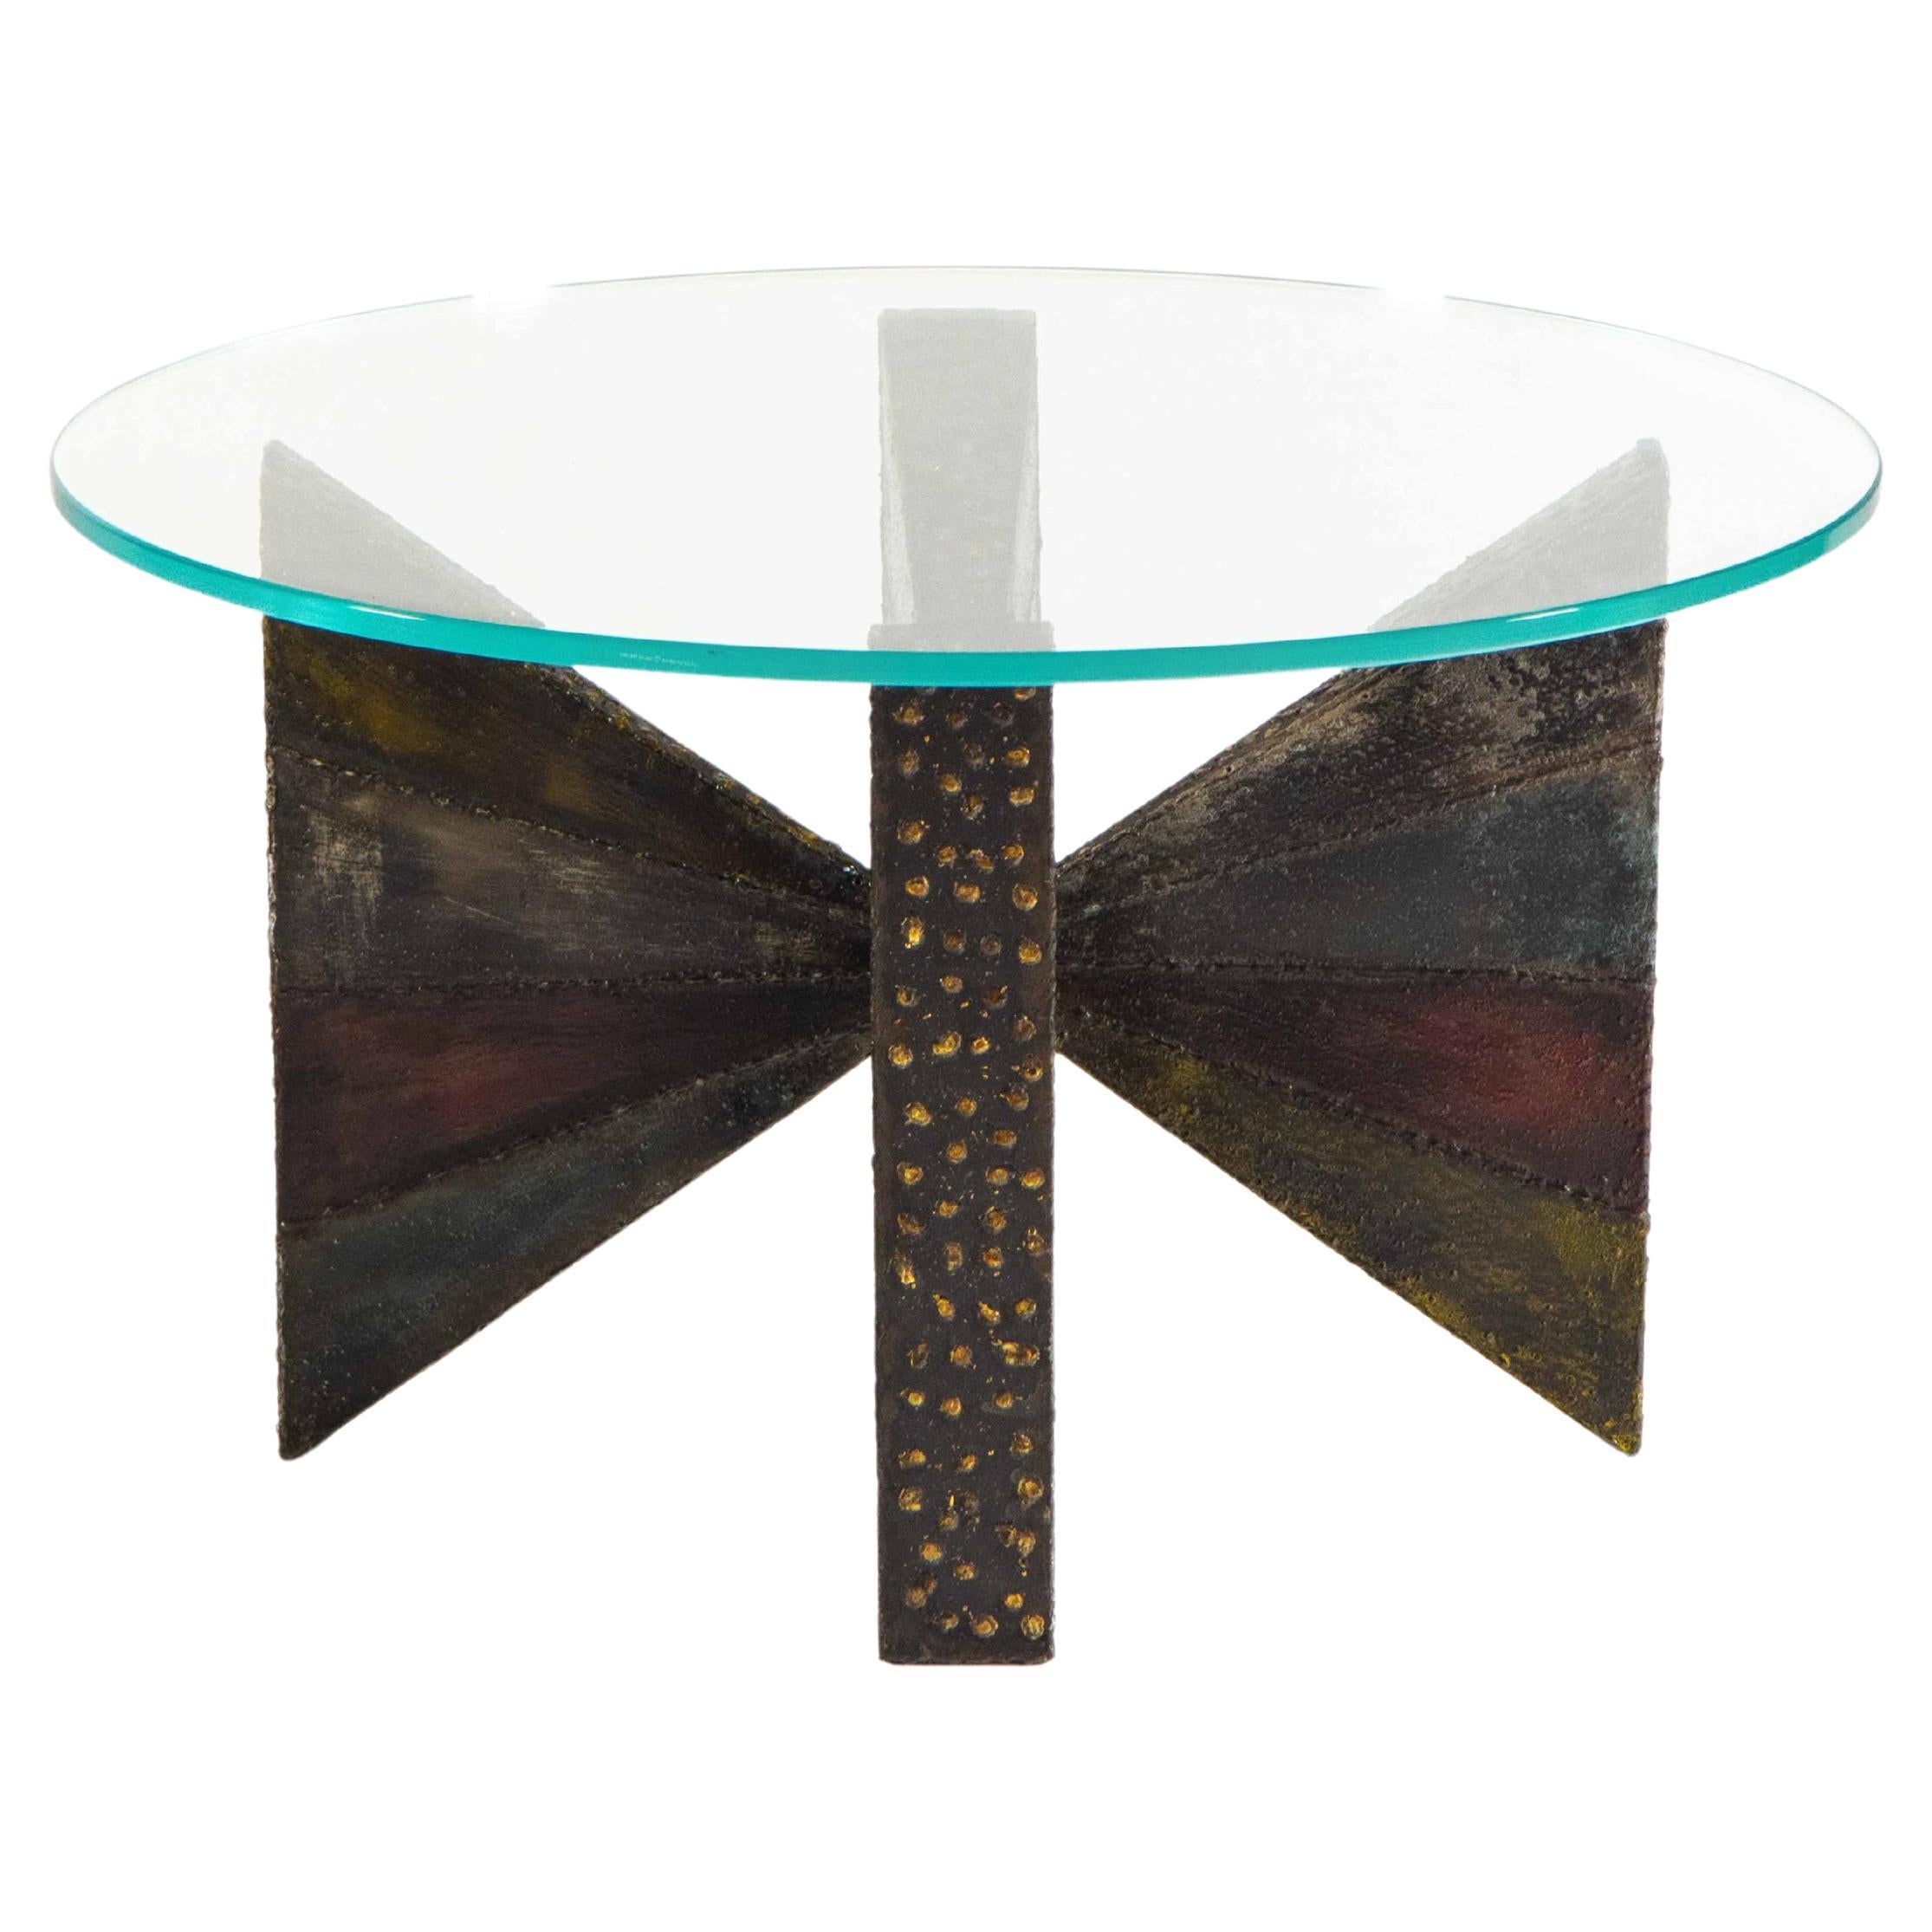 Paul Evans Sculpted Steel & Polychrome Coffee Table Signed and Dated, 1967 For Sale